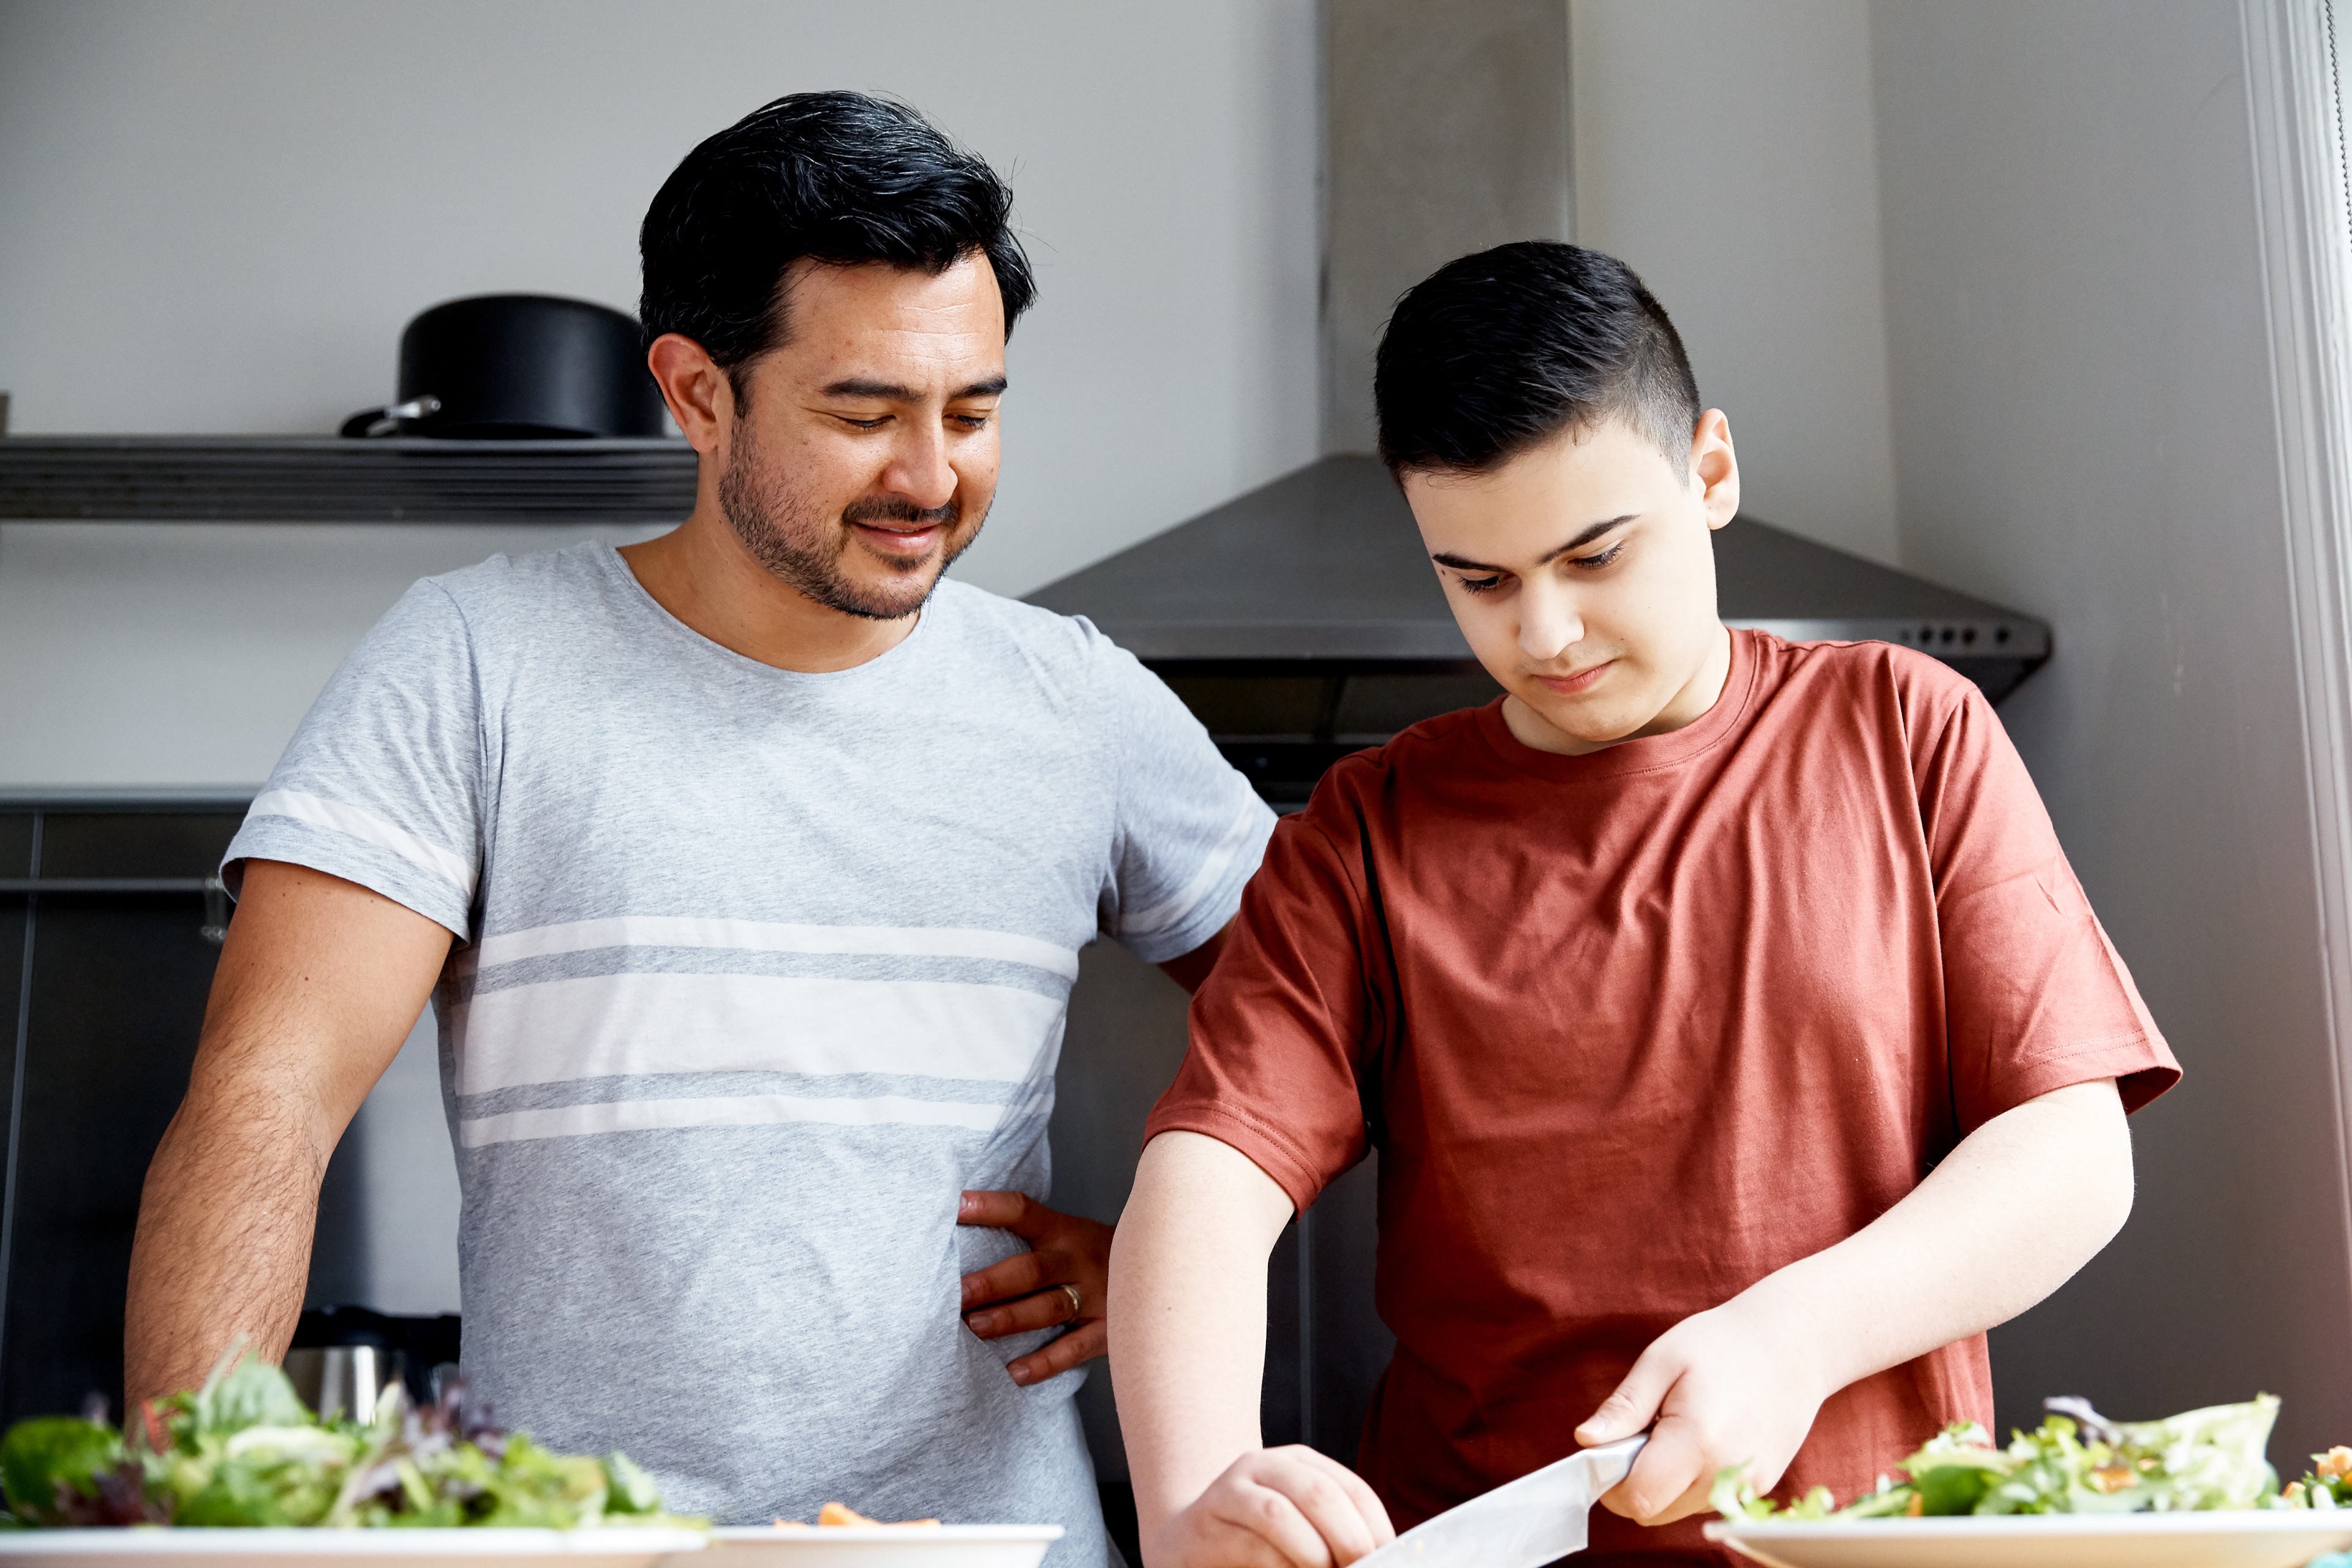 A dad stands next to his son in the kitchen and watches on while the son chops some ingredients. There are two plates with salad in front of them.